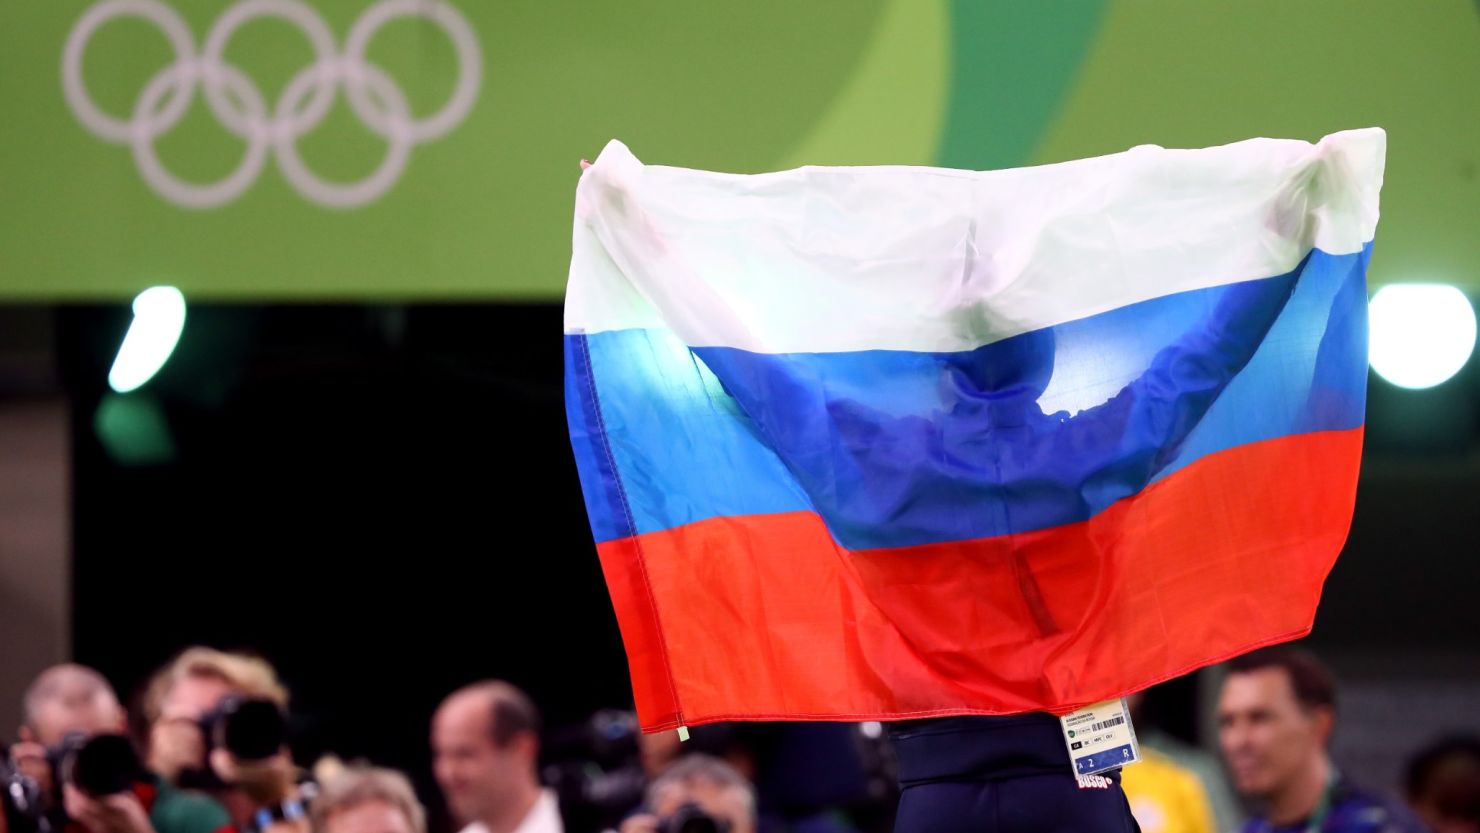 A Russian supporter holds aloft a flag to support the team members competing in Rio.